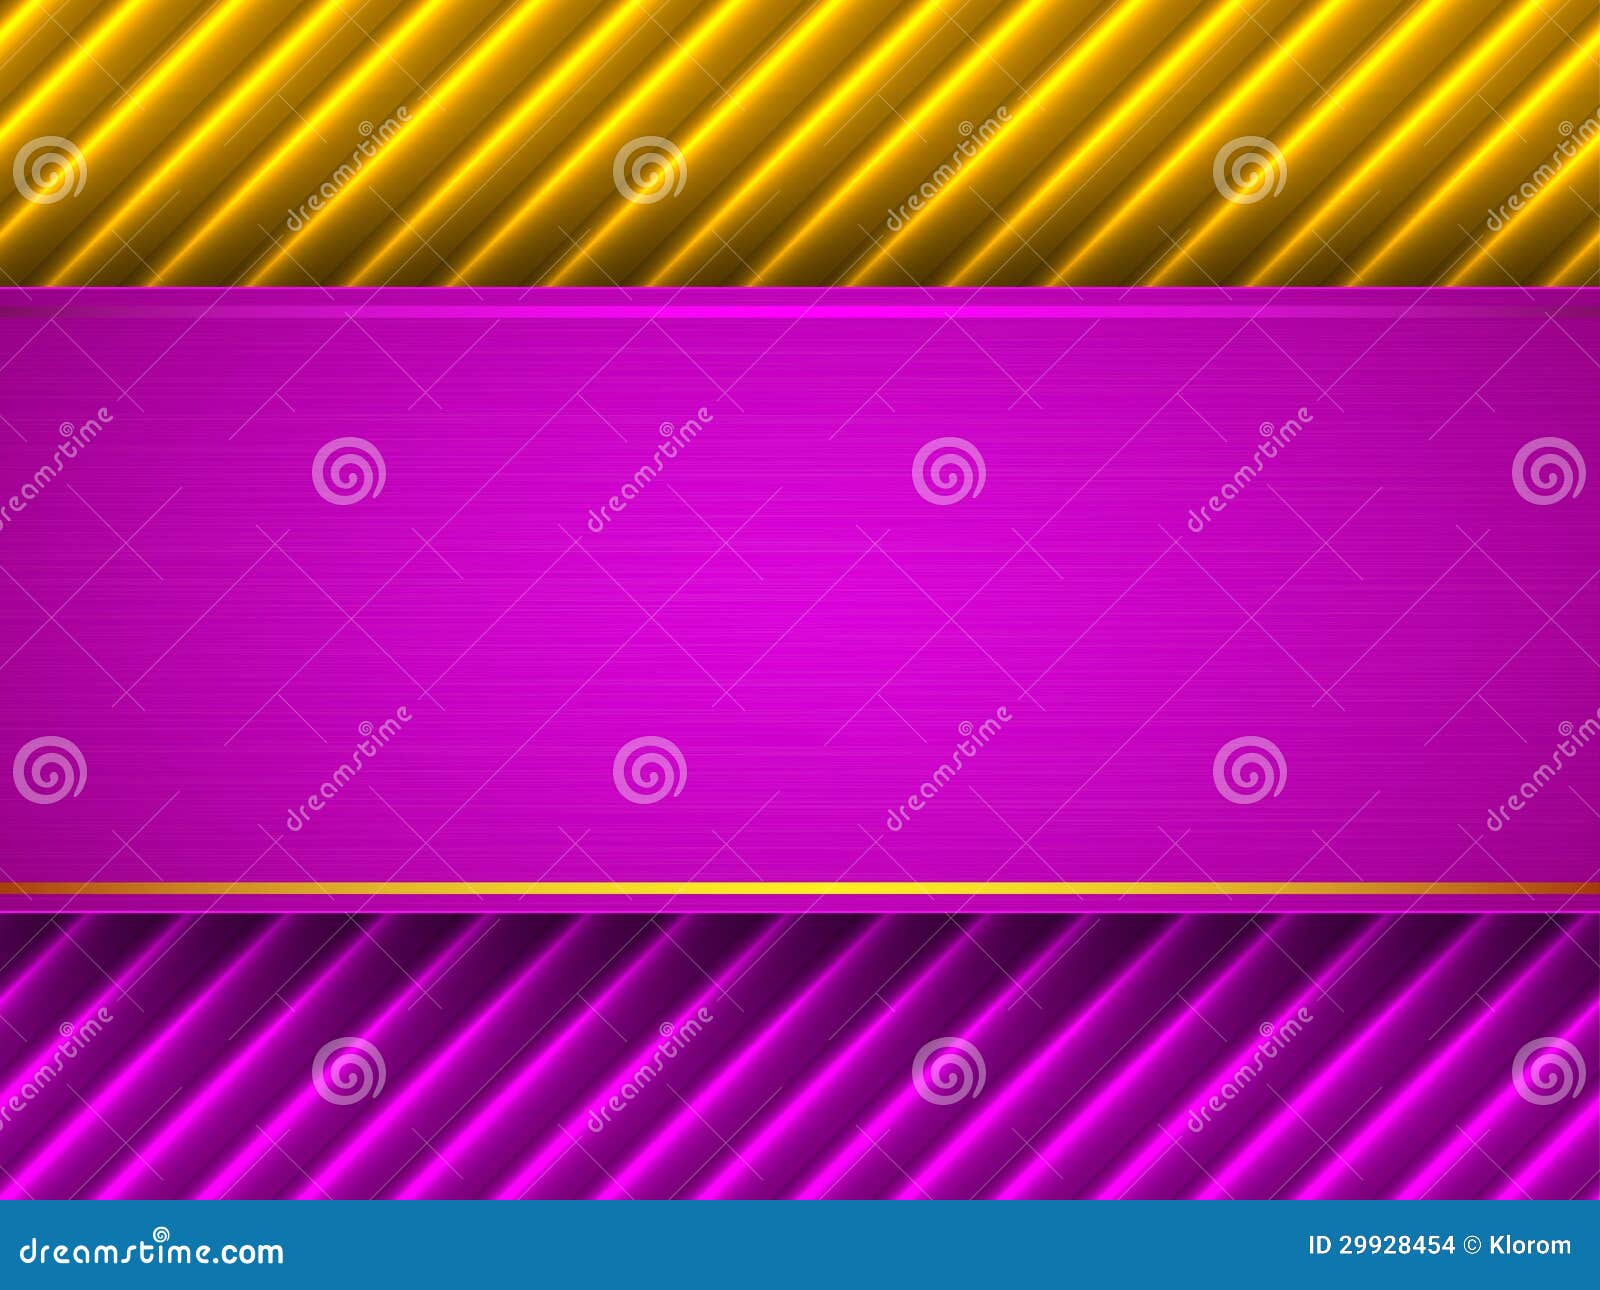 Abstract Purple And Yellow Background Stock Vector - Image: 29928454